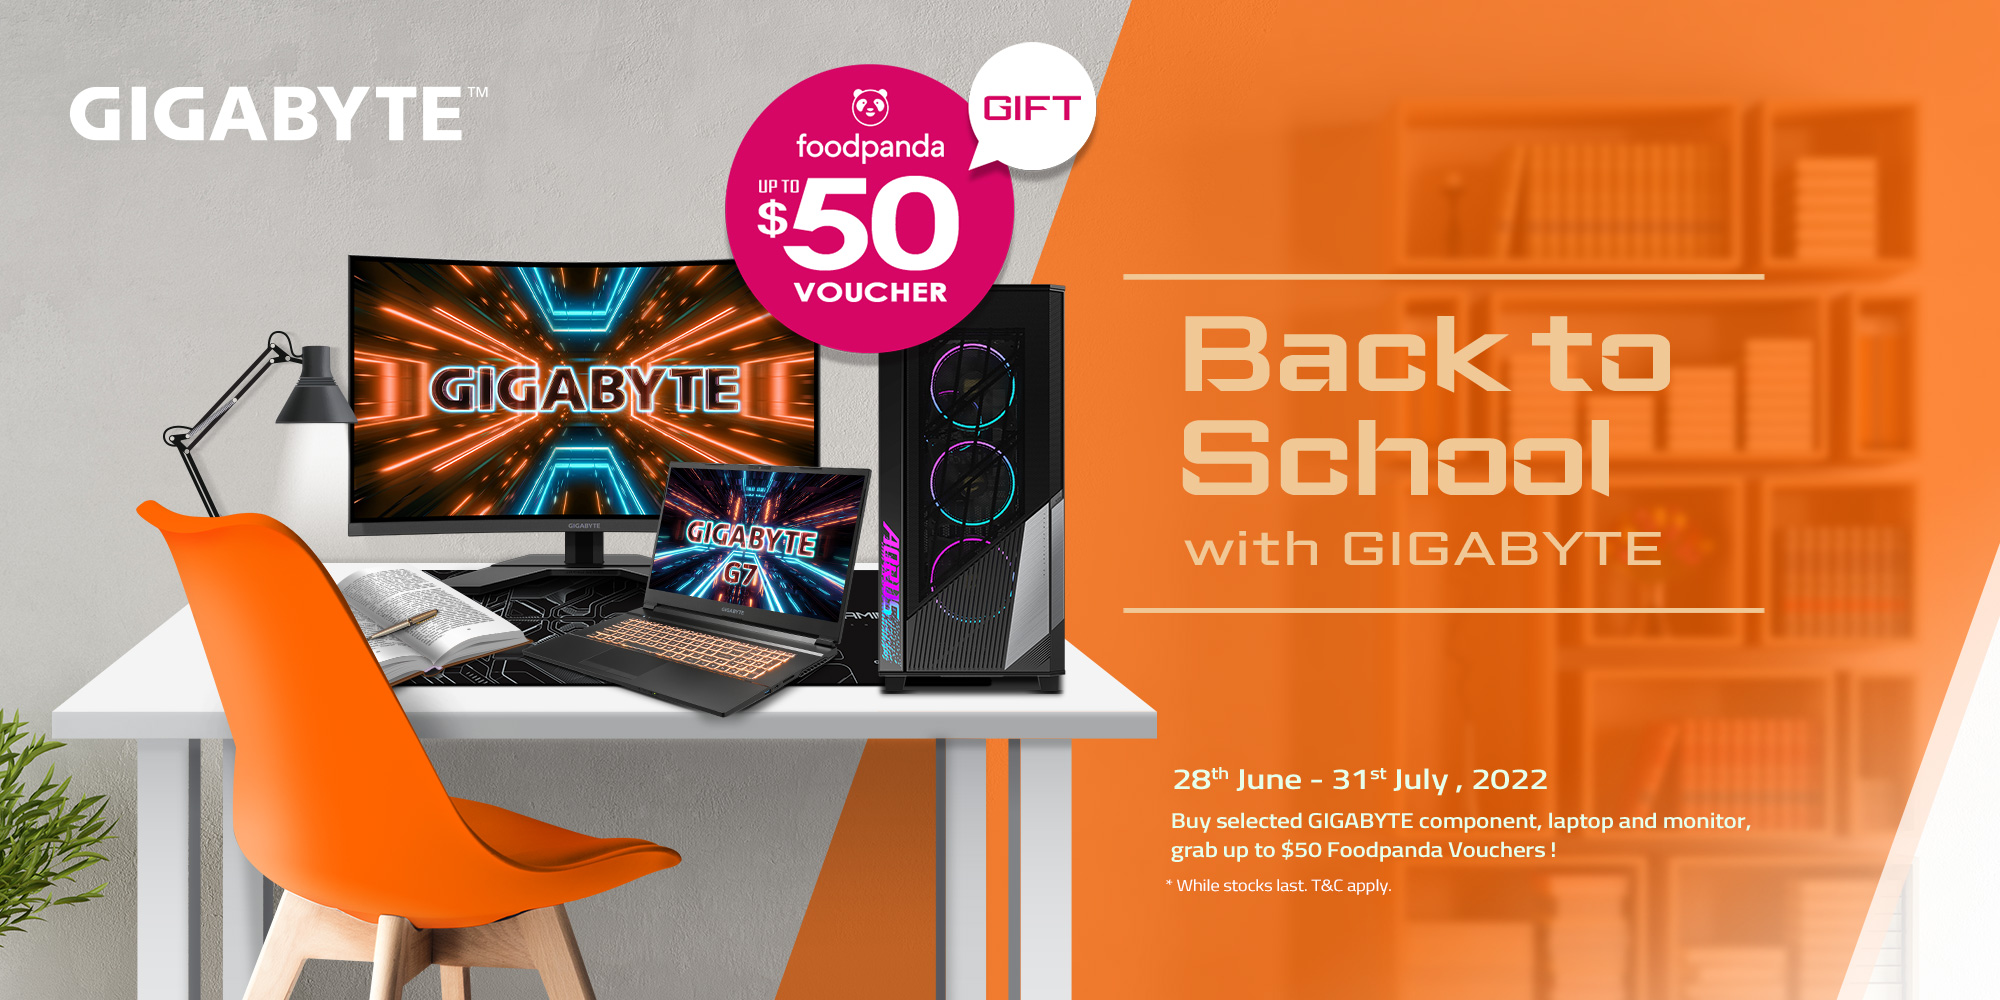 Back to School with GIGABYTE